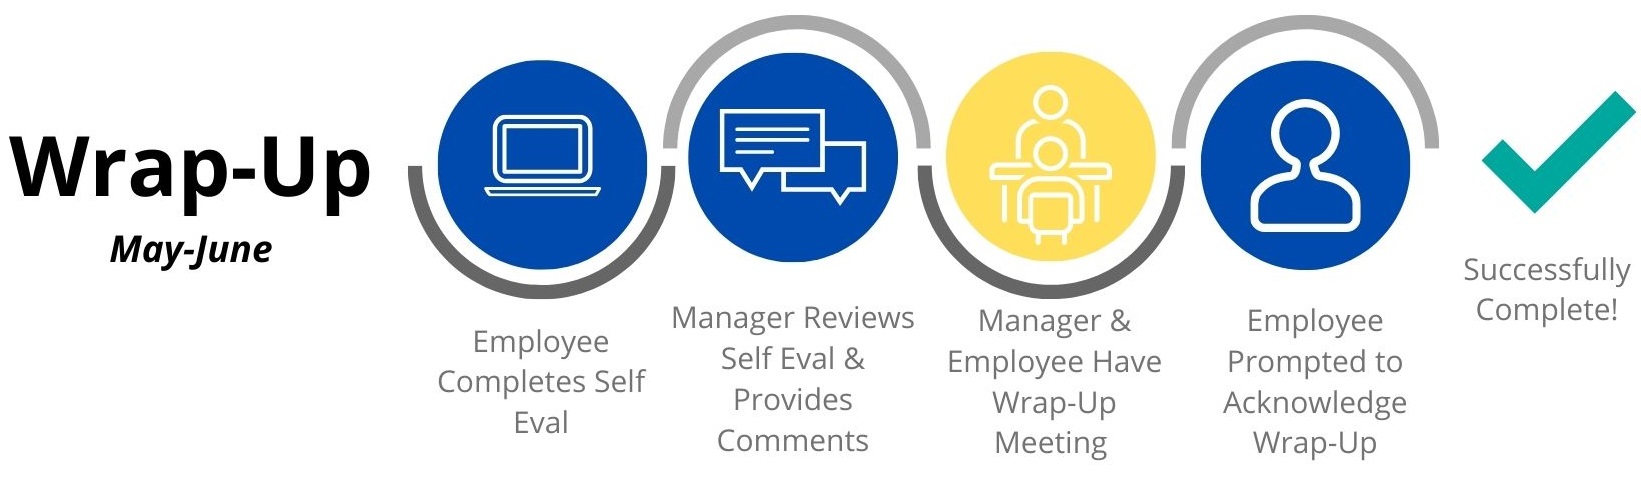 CAP Wrap-Up (May-June)- 1. Employee completes self eval 2. Manager reviews self-eval and provides comments 3. Manager and employee have wrap-up meeting 4. Employee prompted to acknowledge wrap-up 5. Successfully Complete!